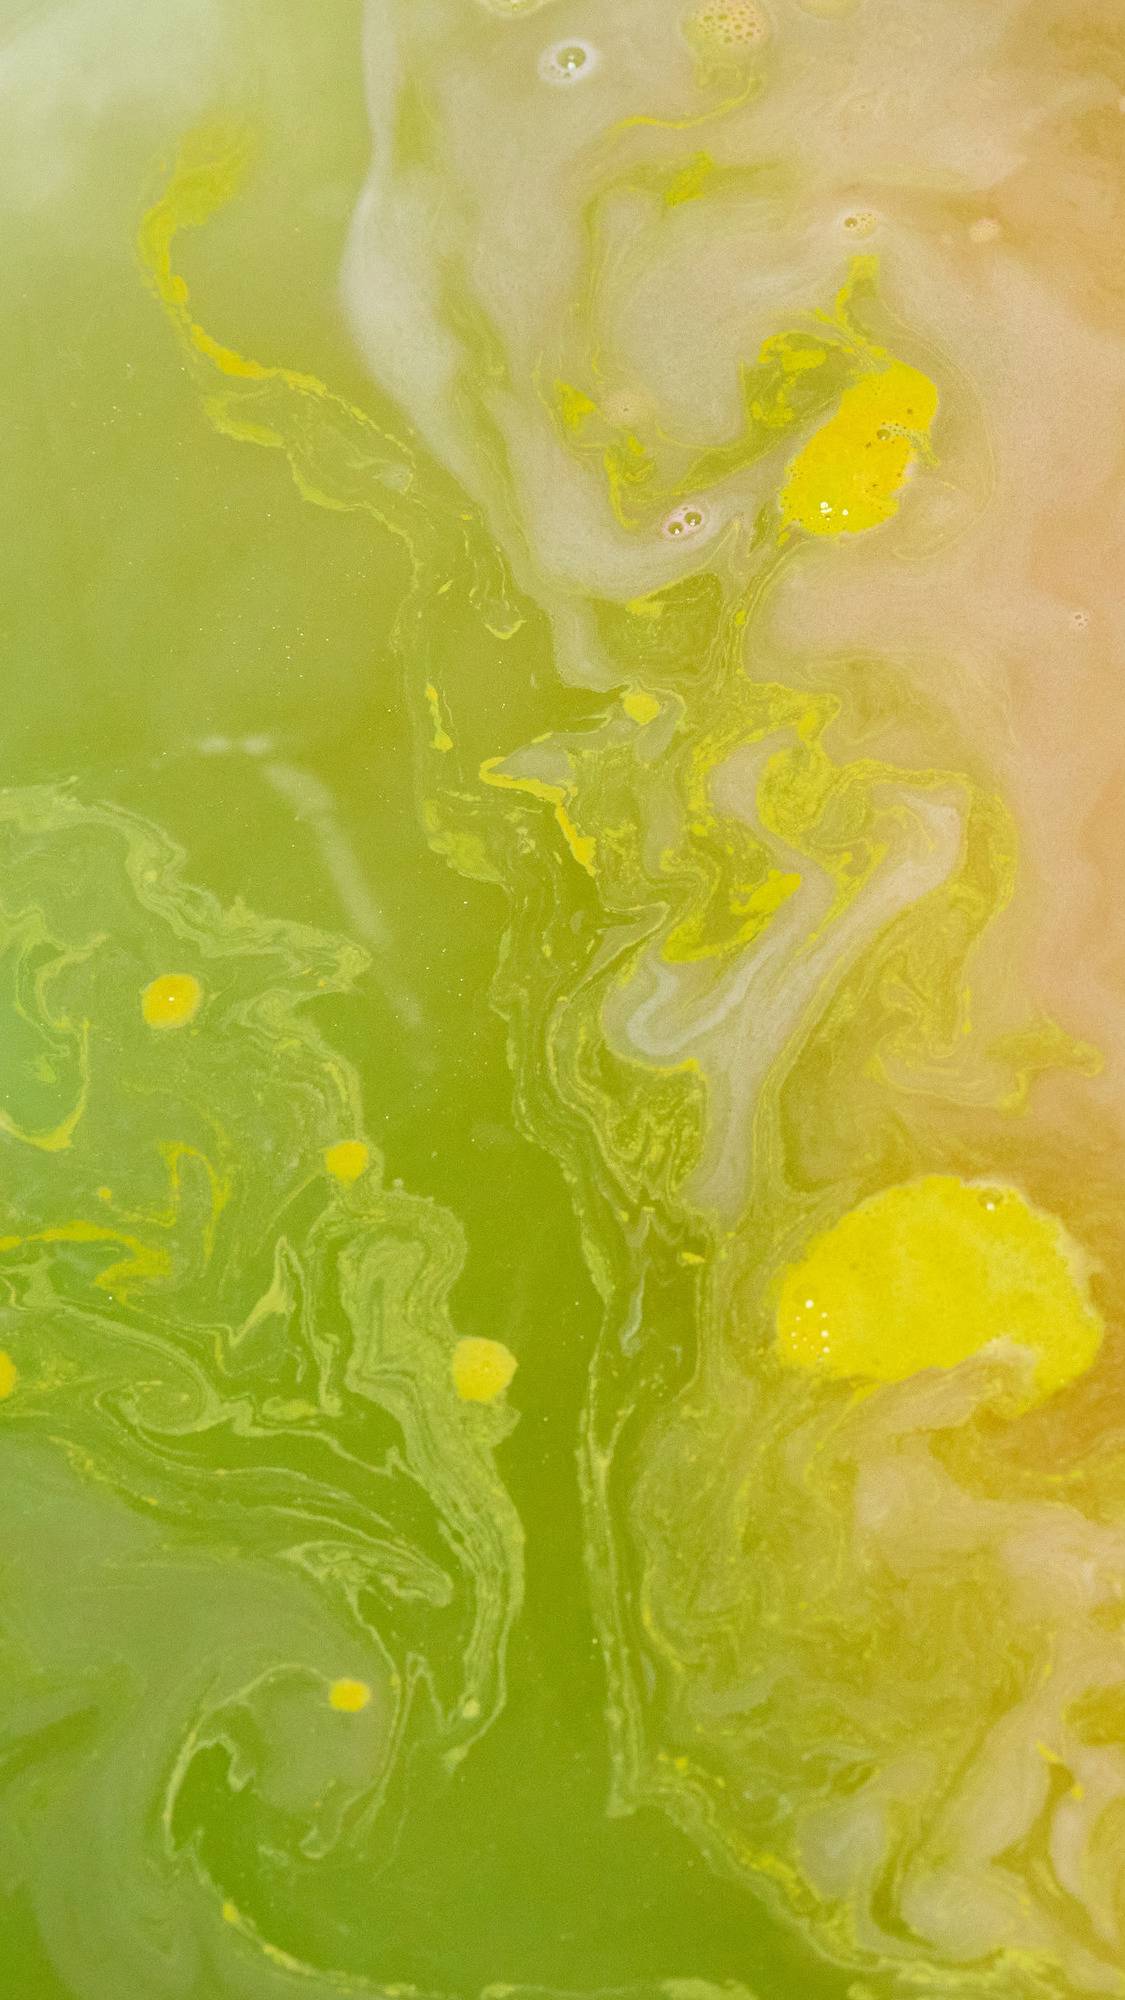 The image shows a close-up of the bath water after using the Pig In A Poke bath bomb. The water is a vibrant yellow with rippled swirls of even brighter yellow. 